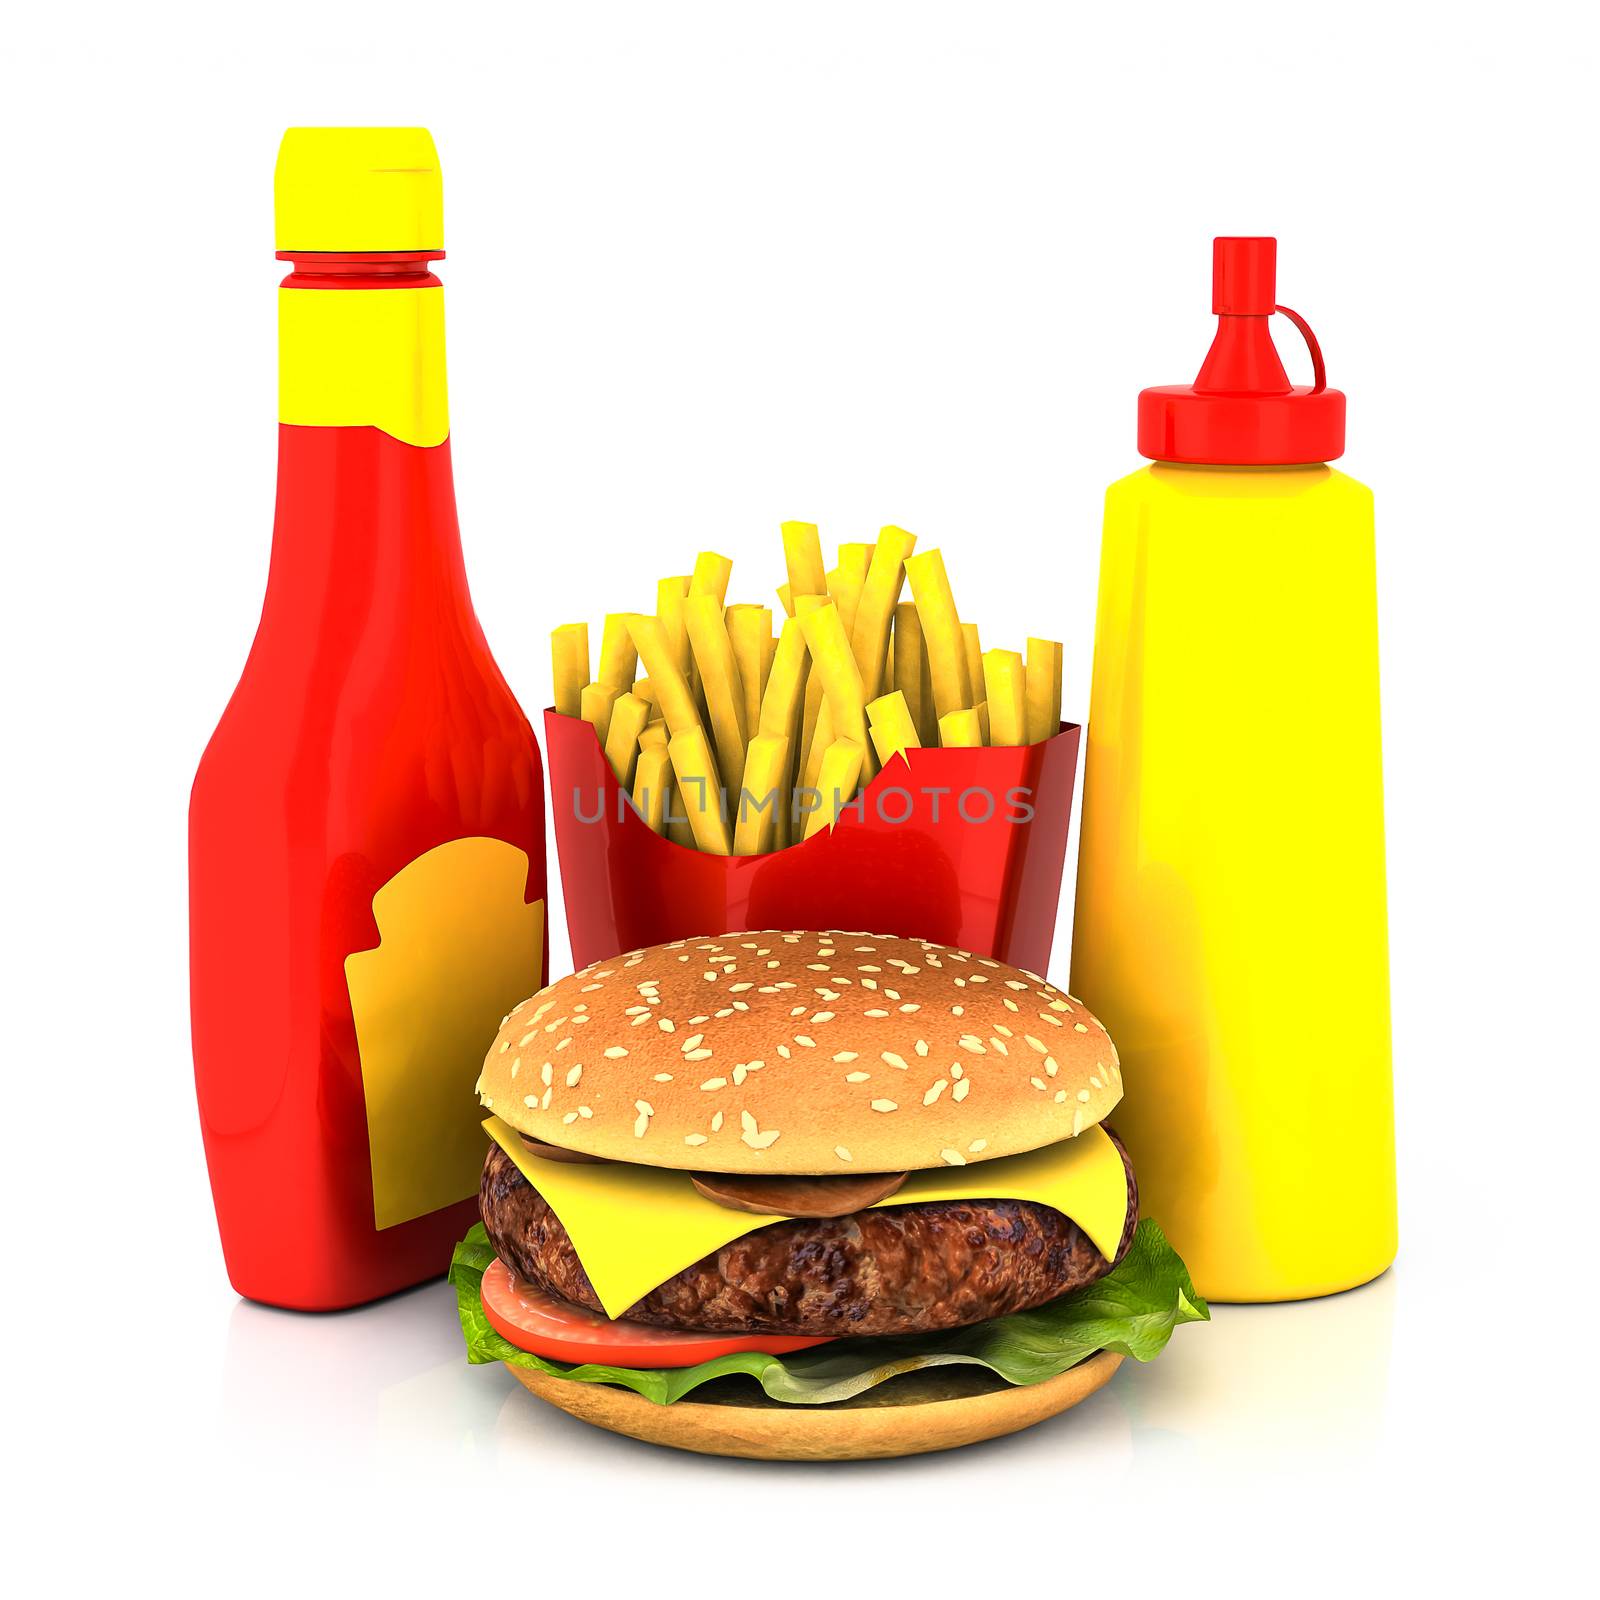 Hamburger, french fries, mustard and ketchup on a white background